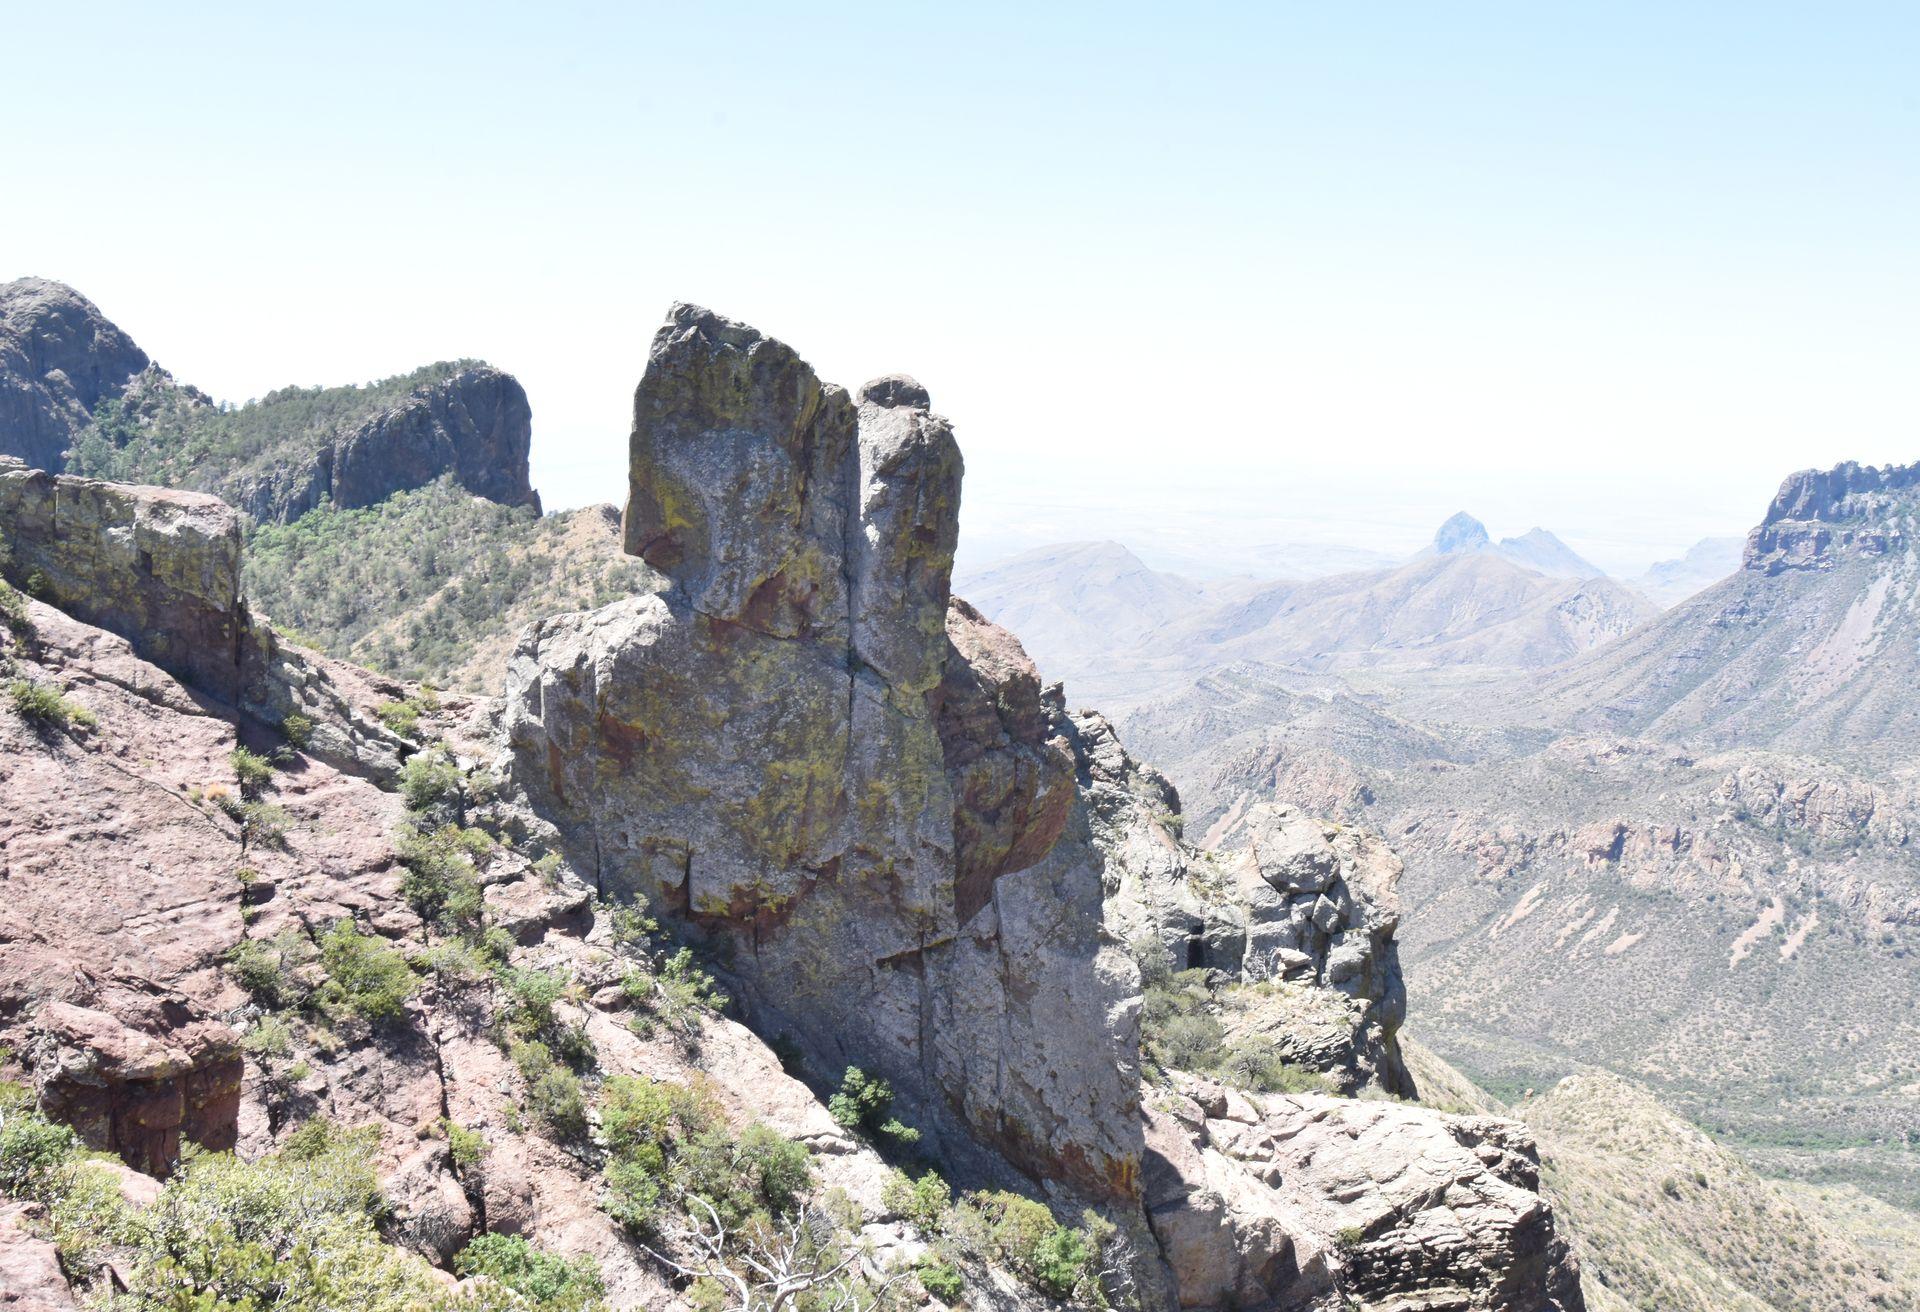 A rock formation towering into the air on the Lost Mine Trail in Big Bend National Park.